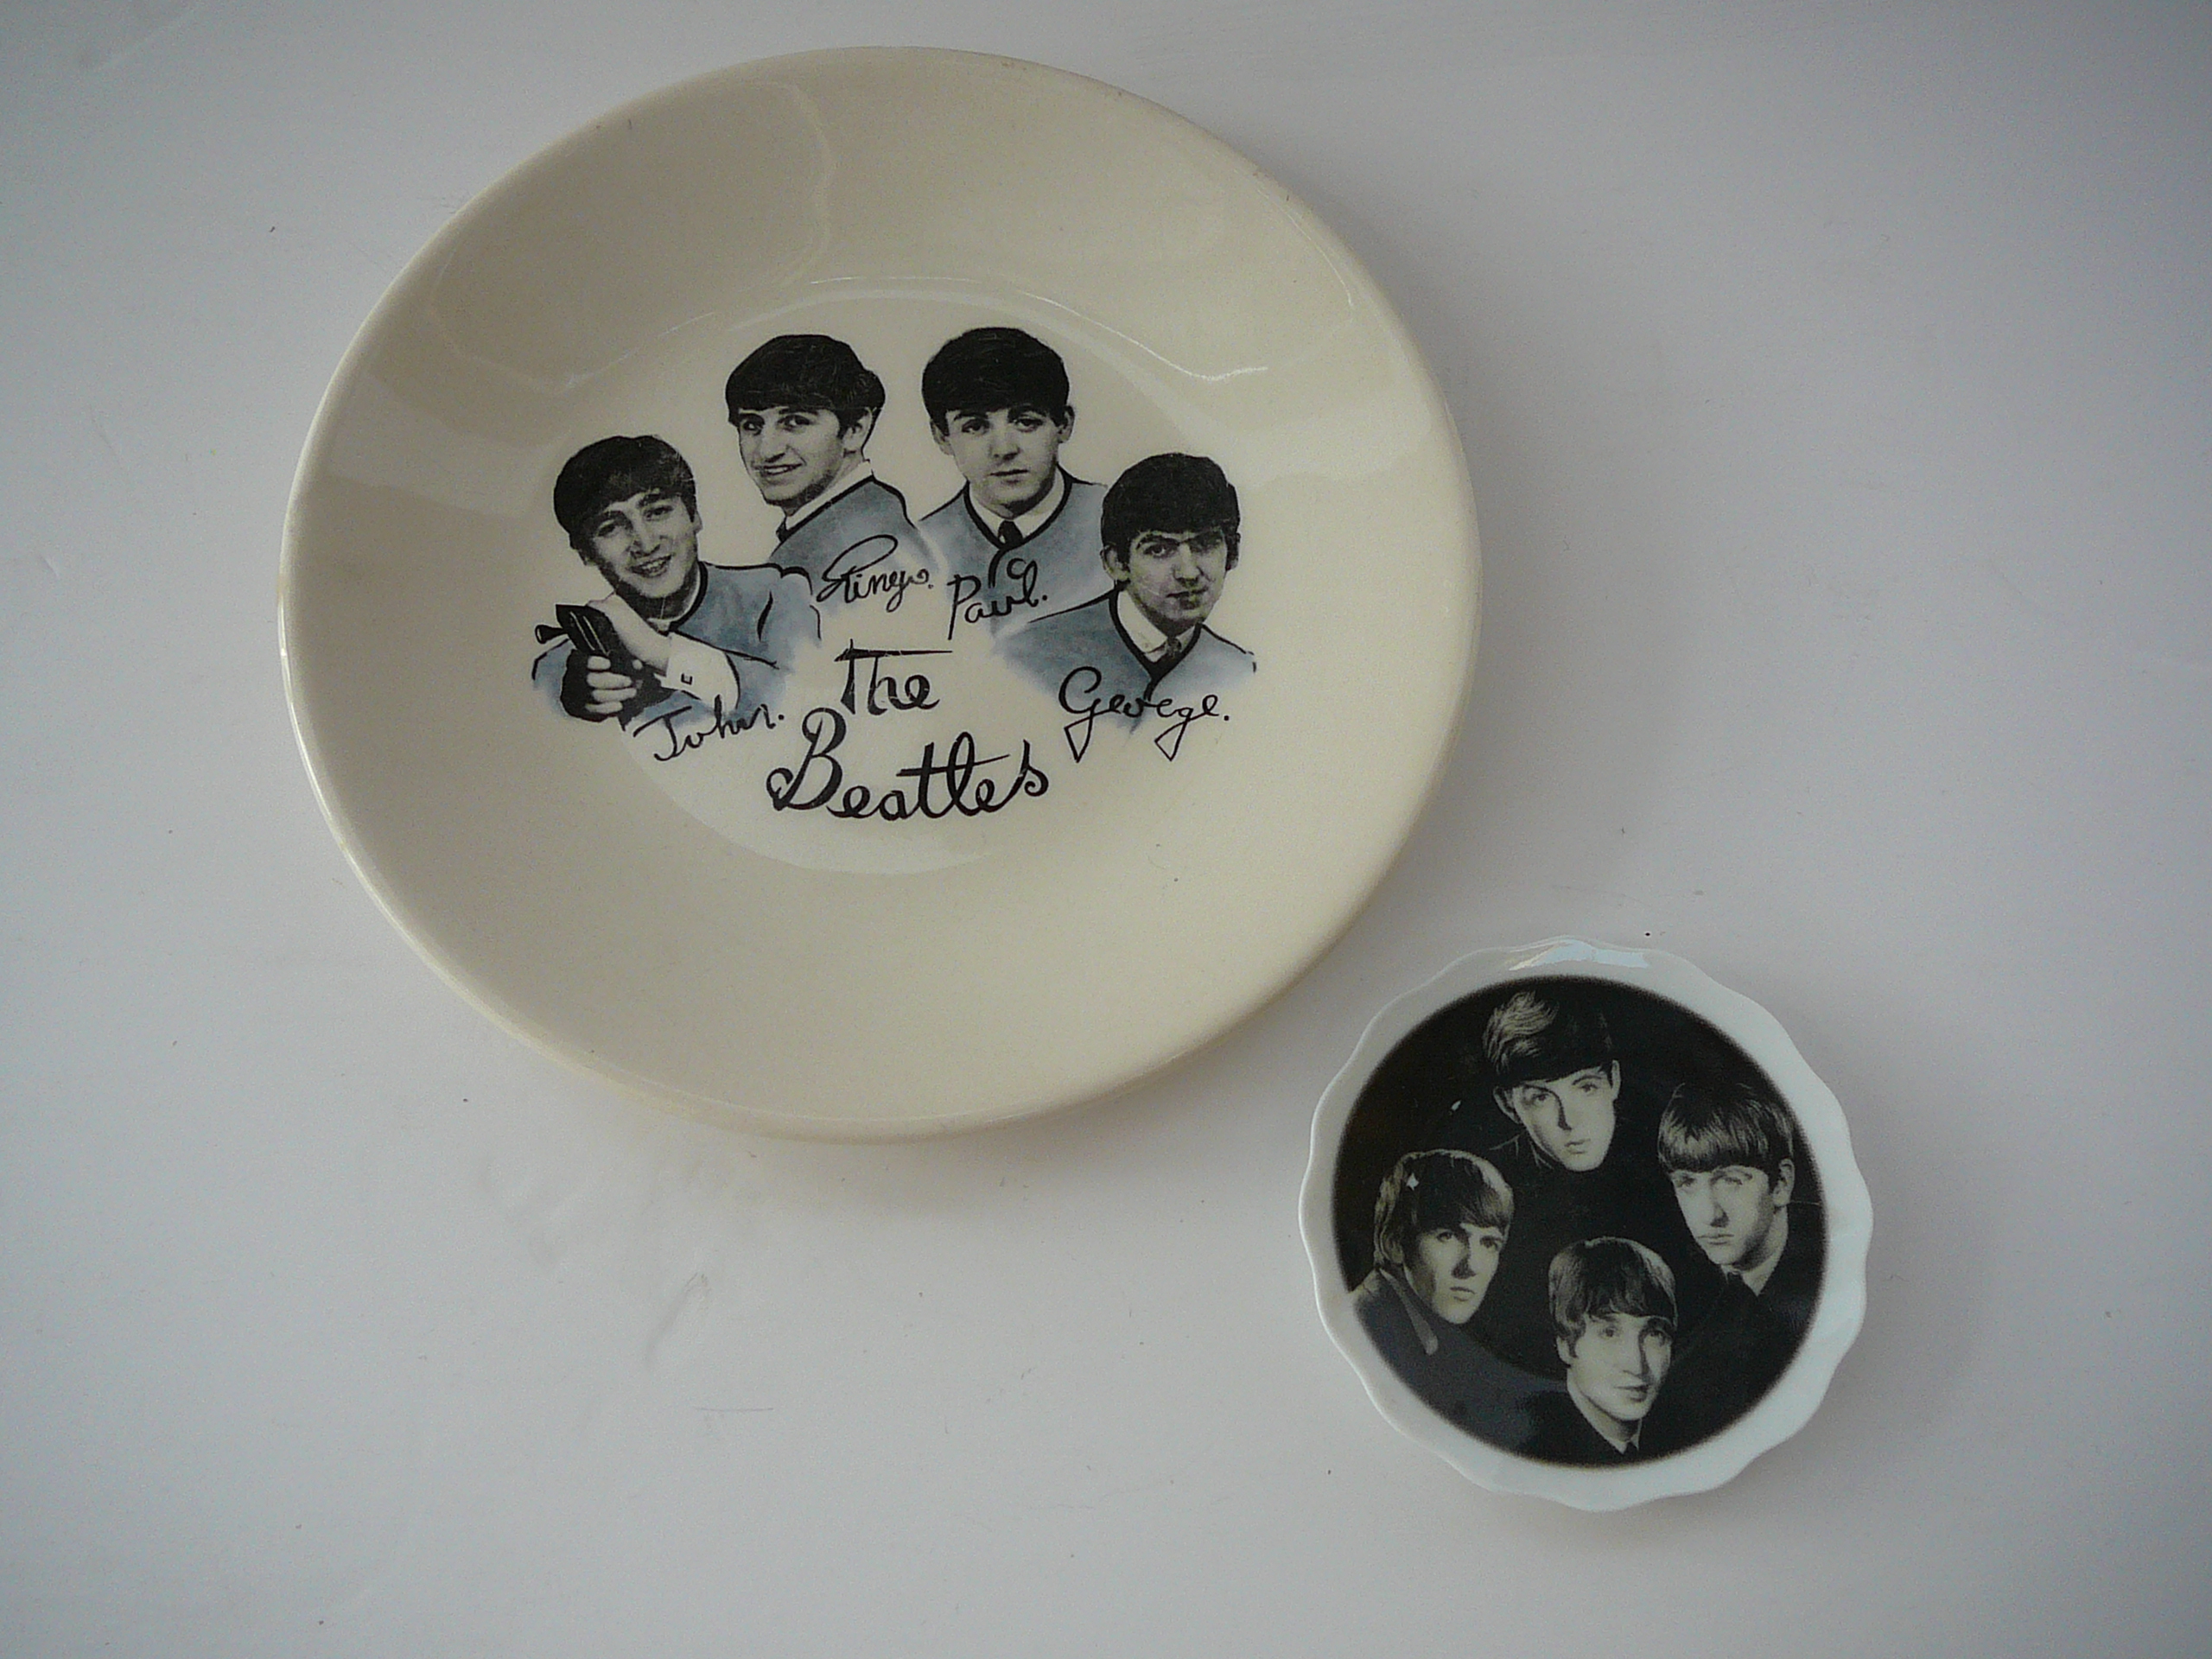 Two commemorative plates transfer printed with images of The Beatles